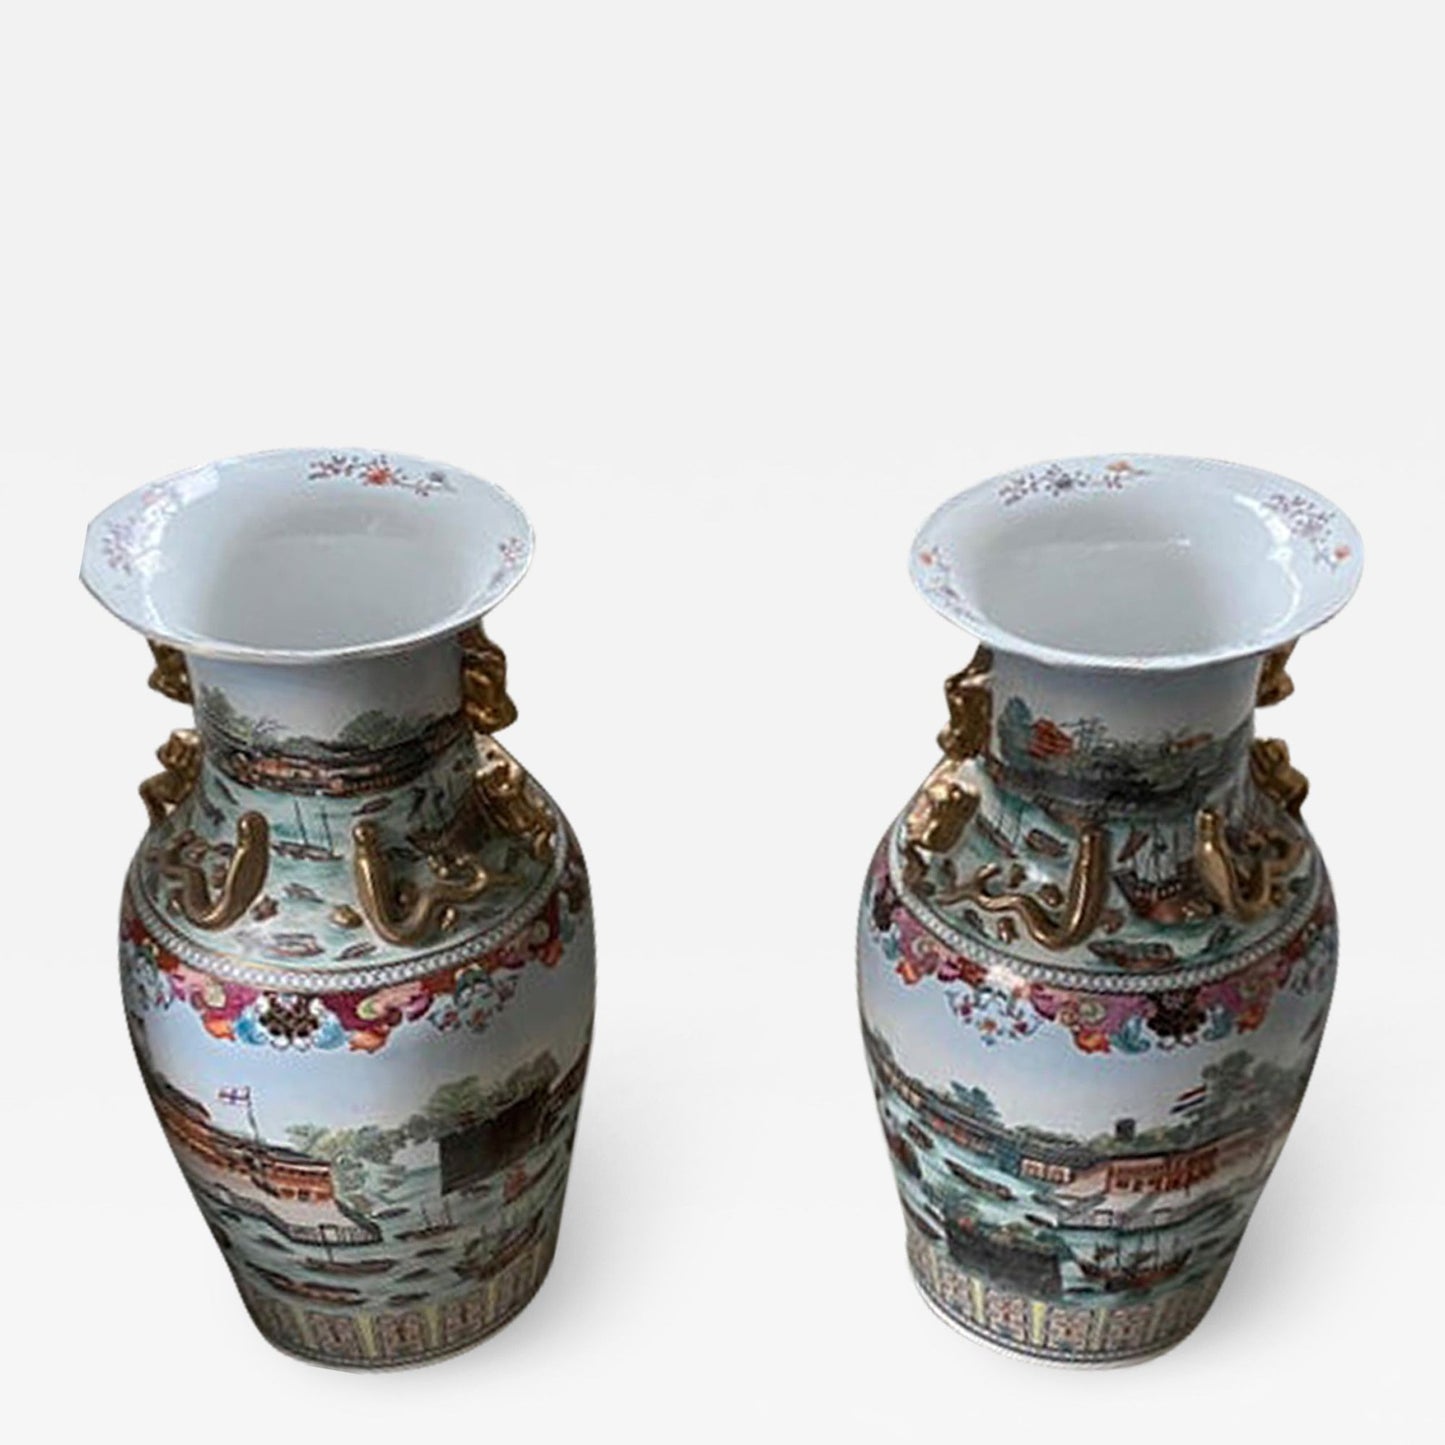 Large Pair of Chinese Porcelain Palace Vases with Views of the Hongs